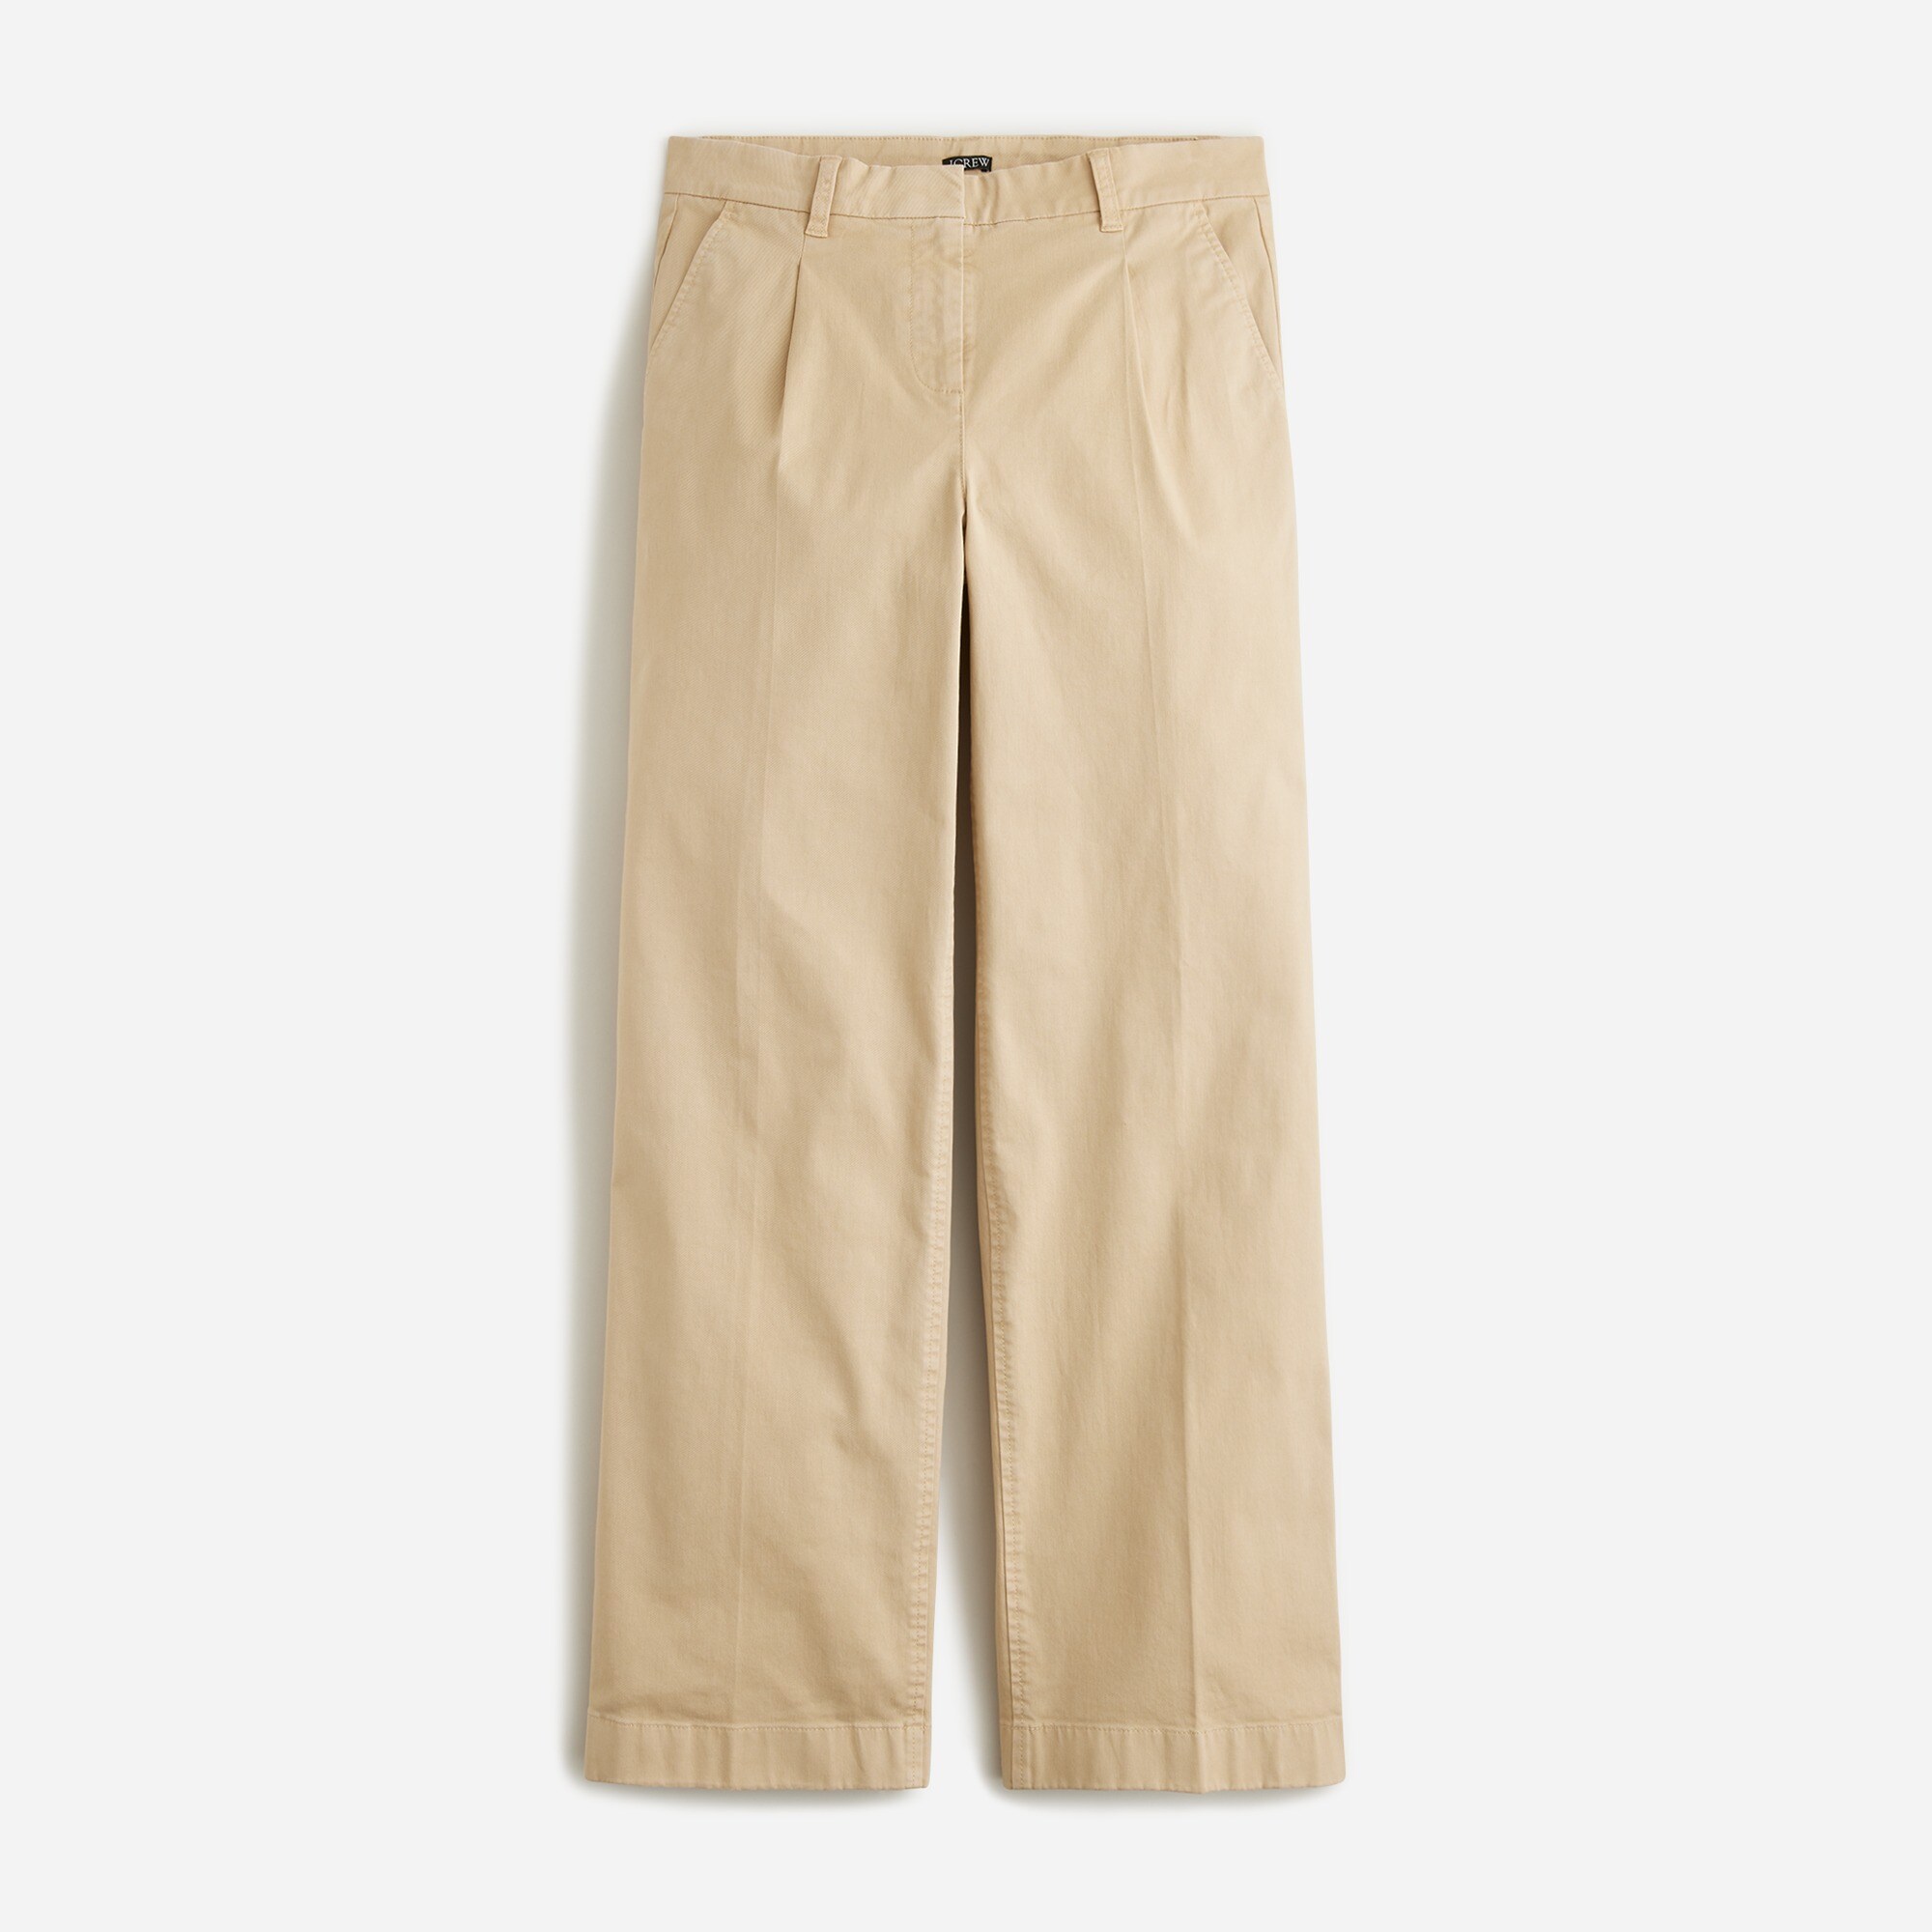  Tall pleated capeside chino pant